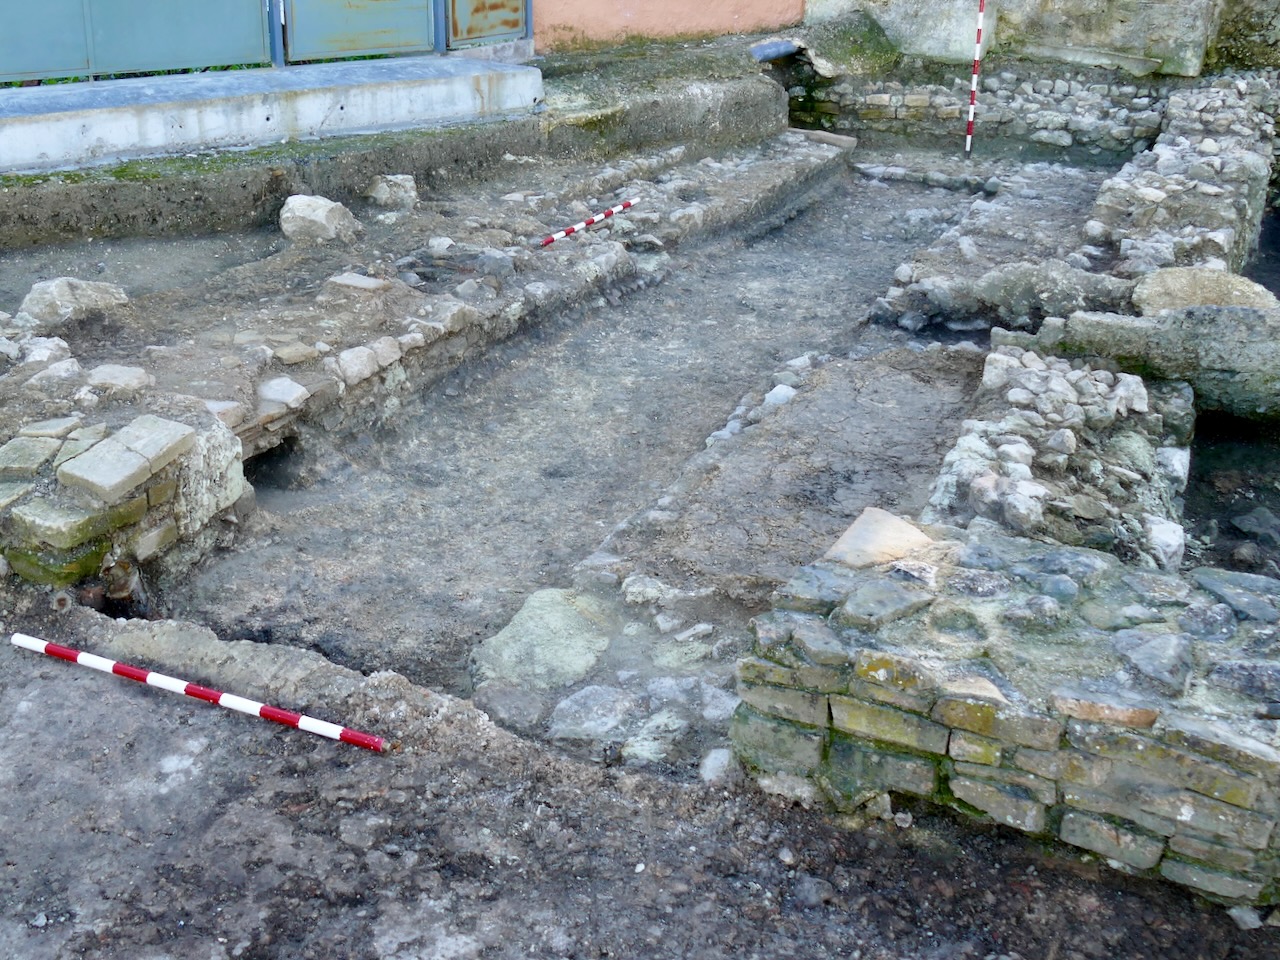 Mithraeum of Cabra, view from entrance